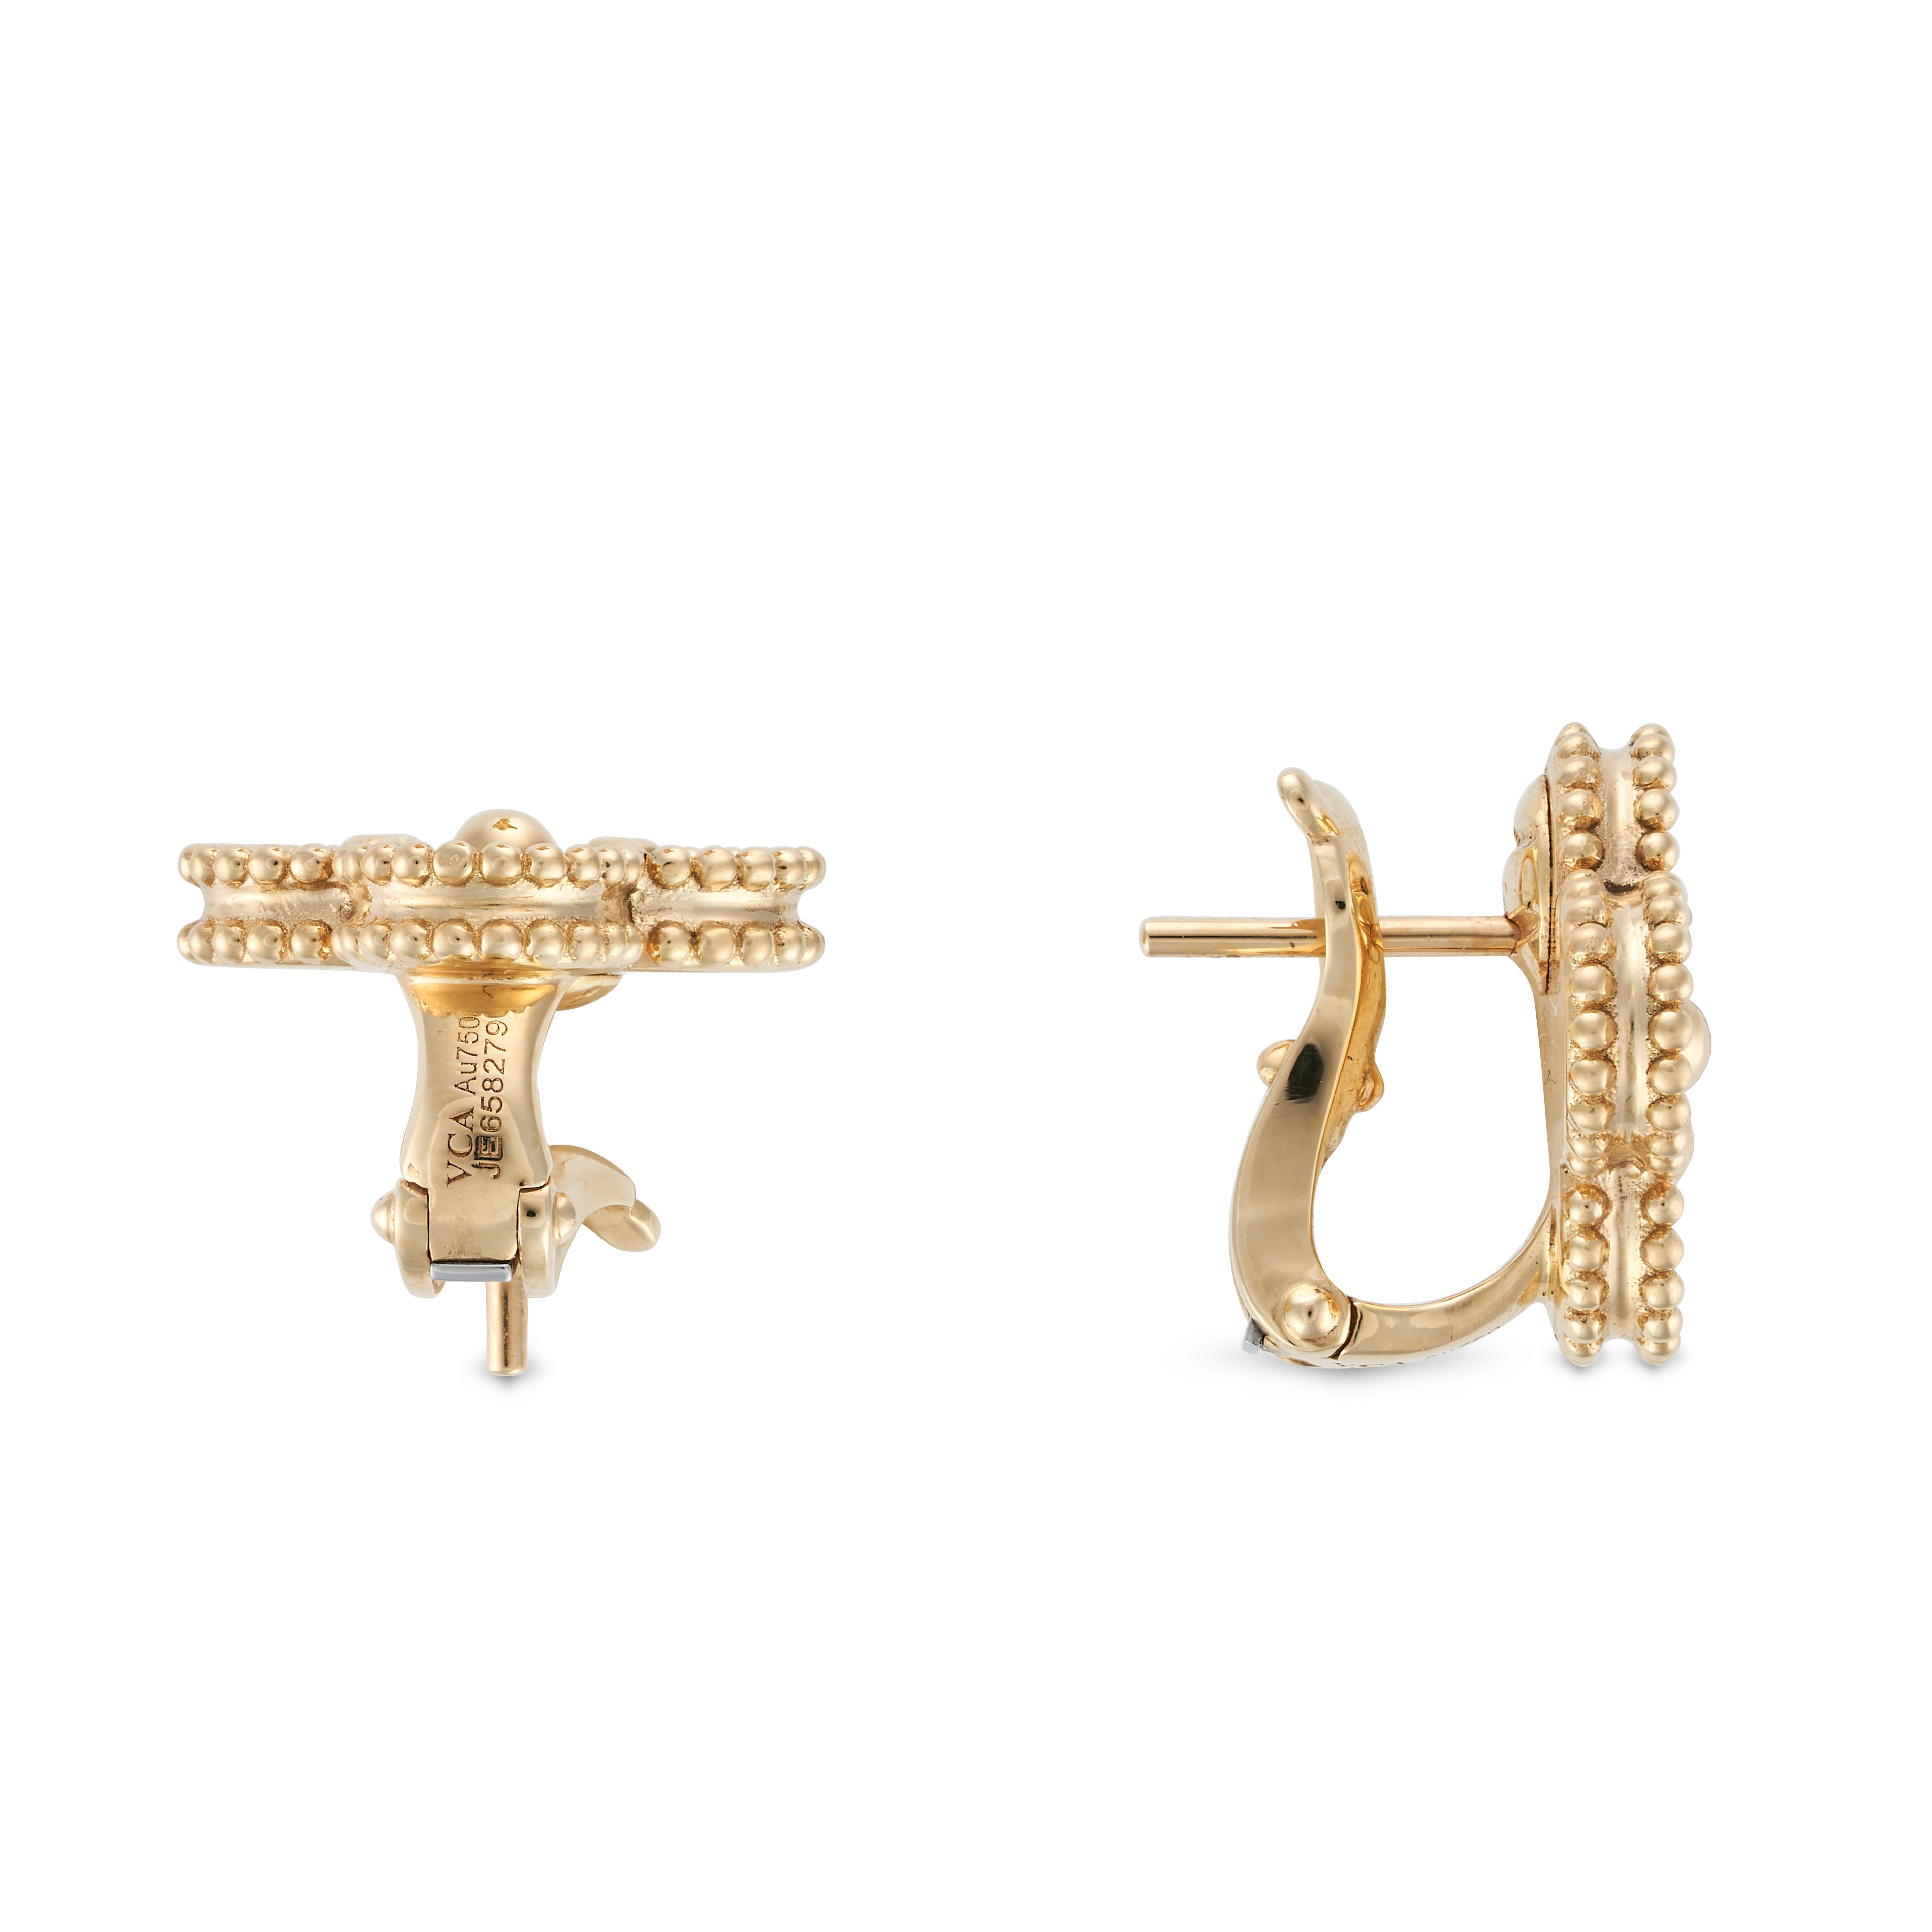 VAN CLEEF & ARPELS, A PAIR OF VINTAGE ALHAMBRA EARRINGS in 18ct yellow gold, each comprising a qu... - Image 2 of 3